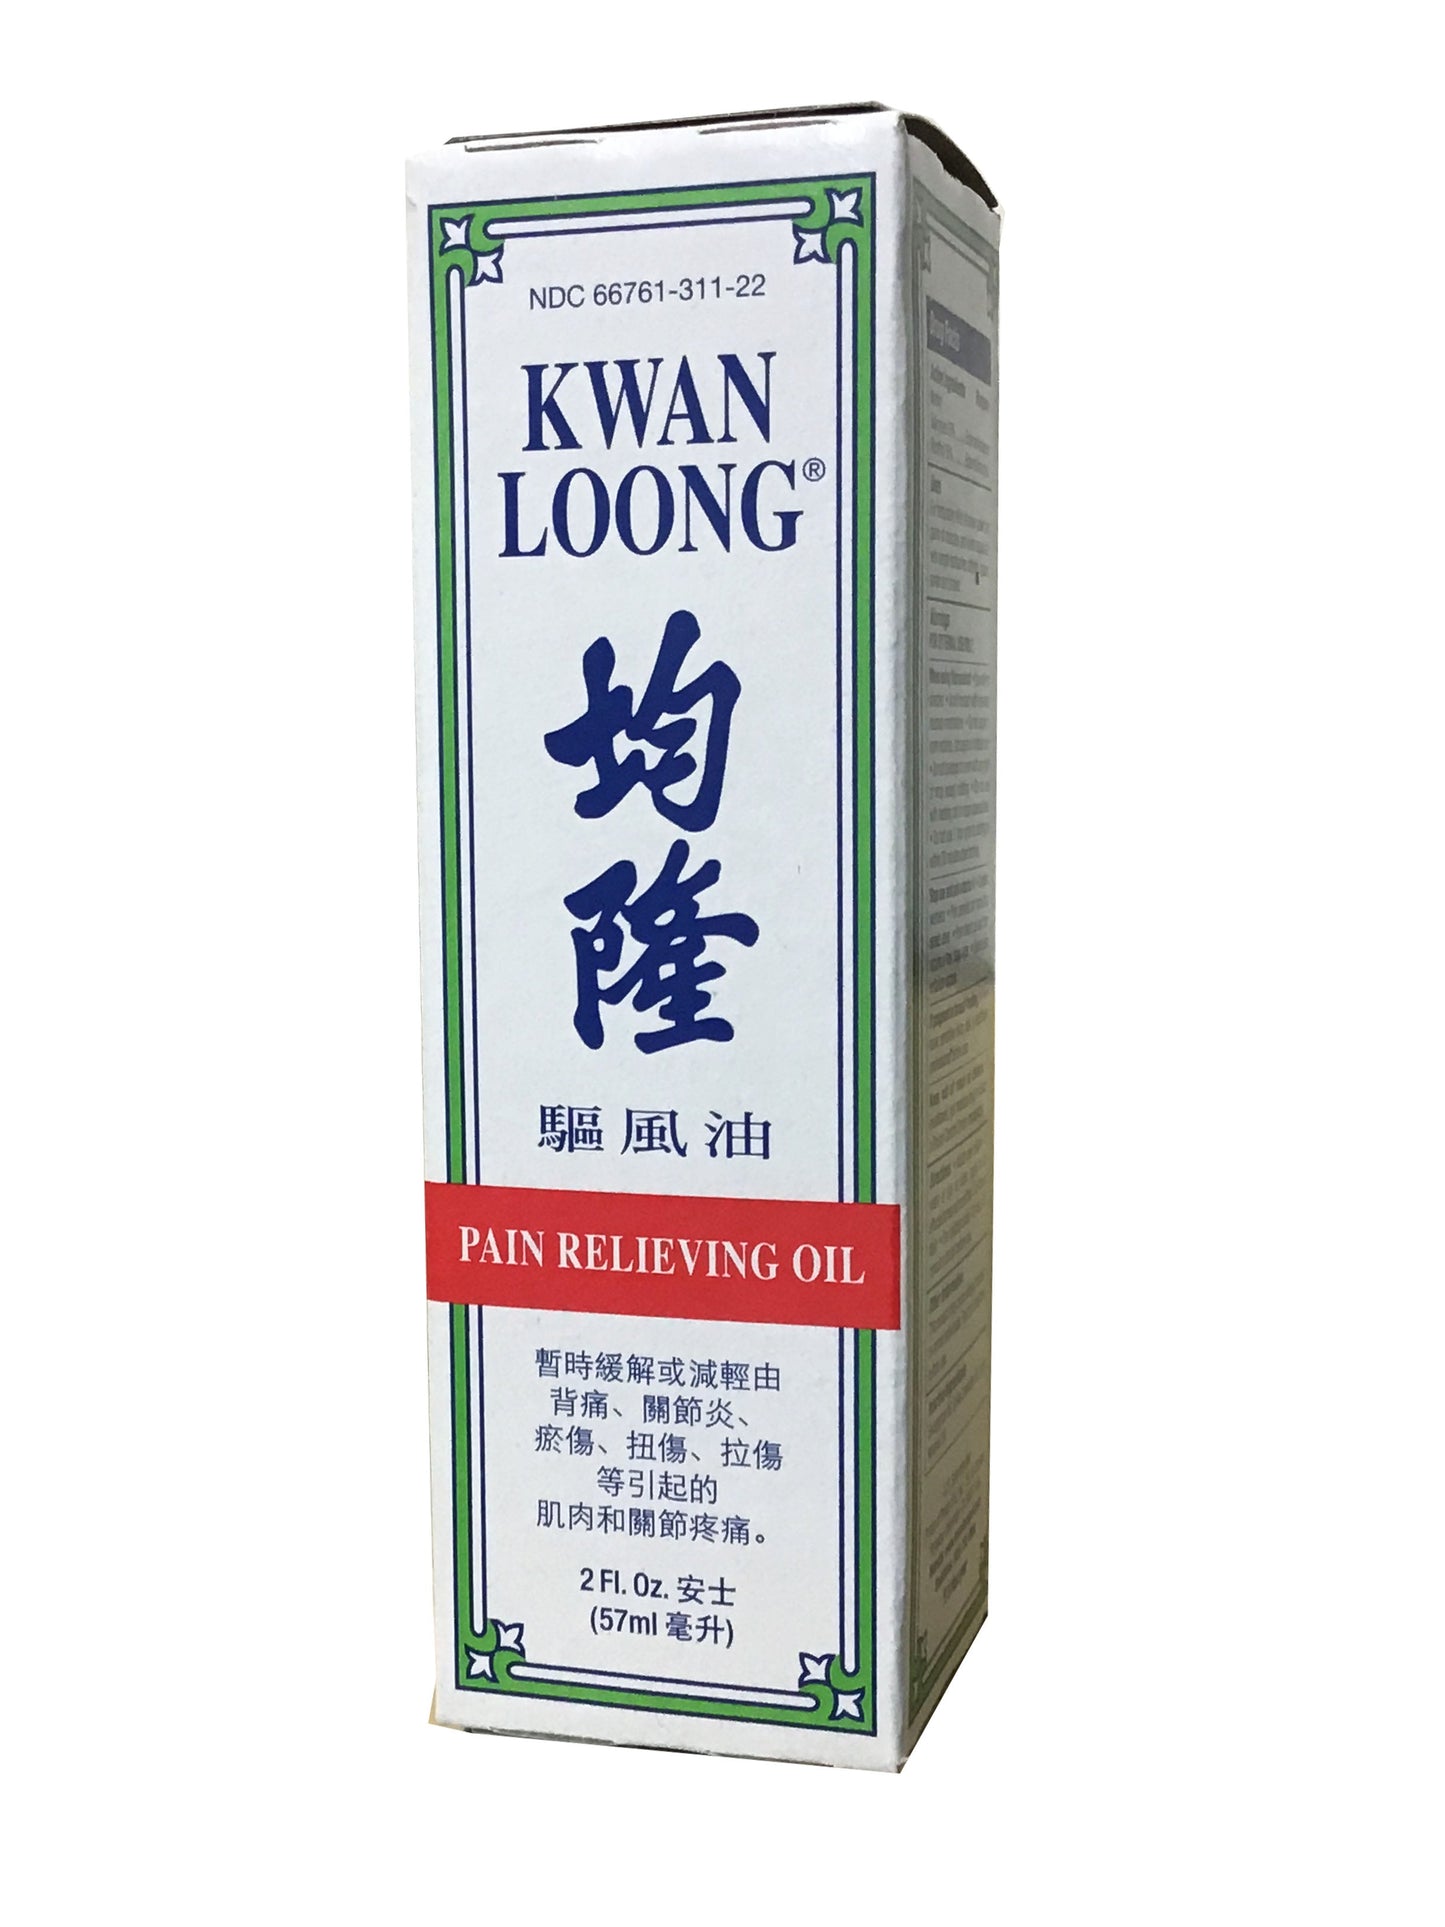 Kwan Loong Pain Relieving Oil 均隆驅風油 (2 fl oz)